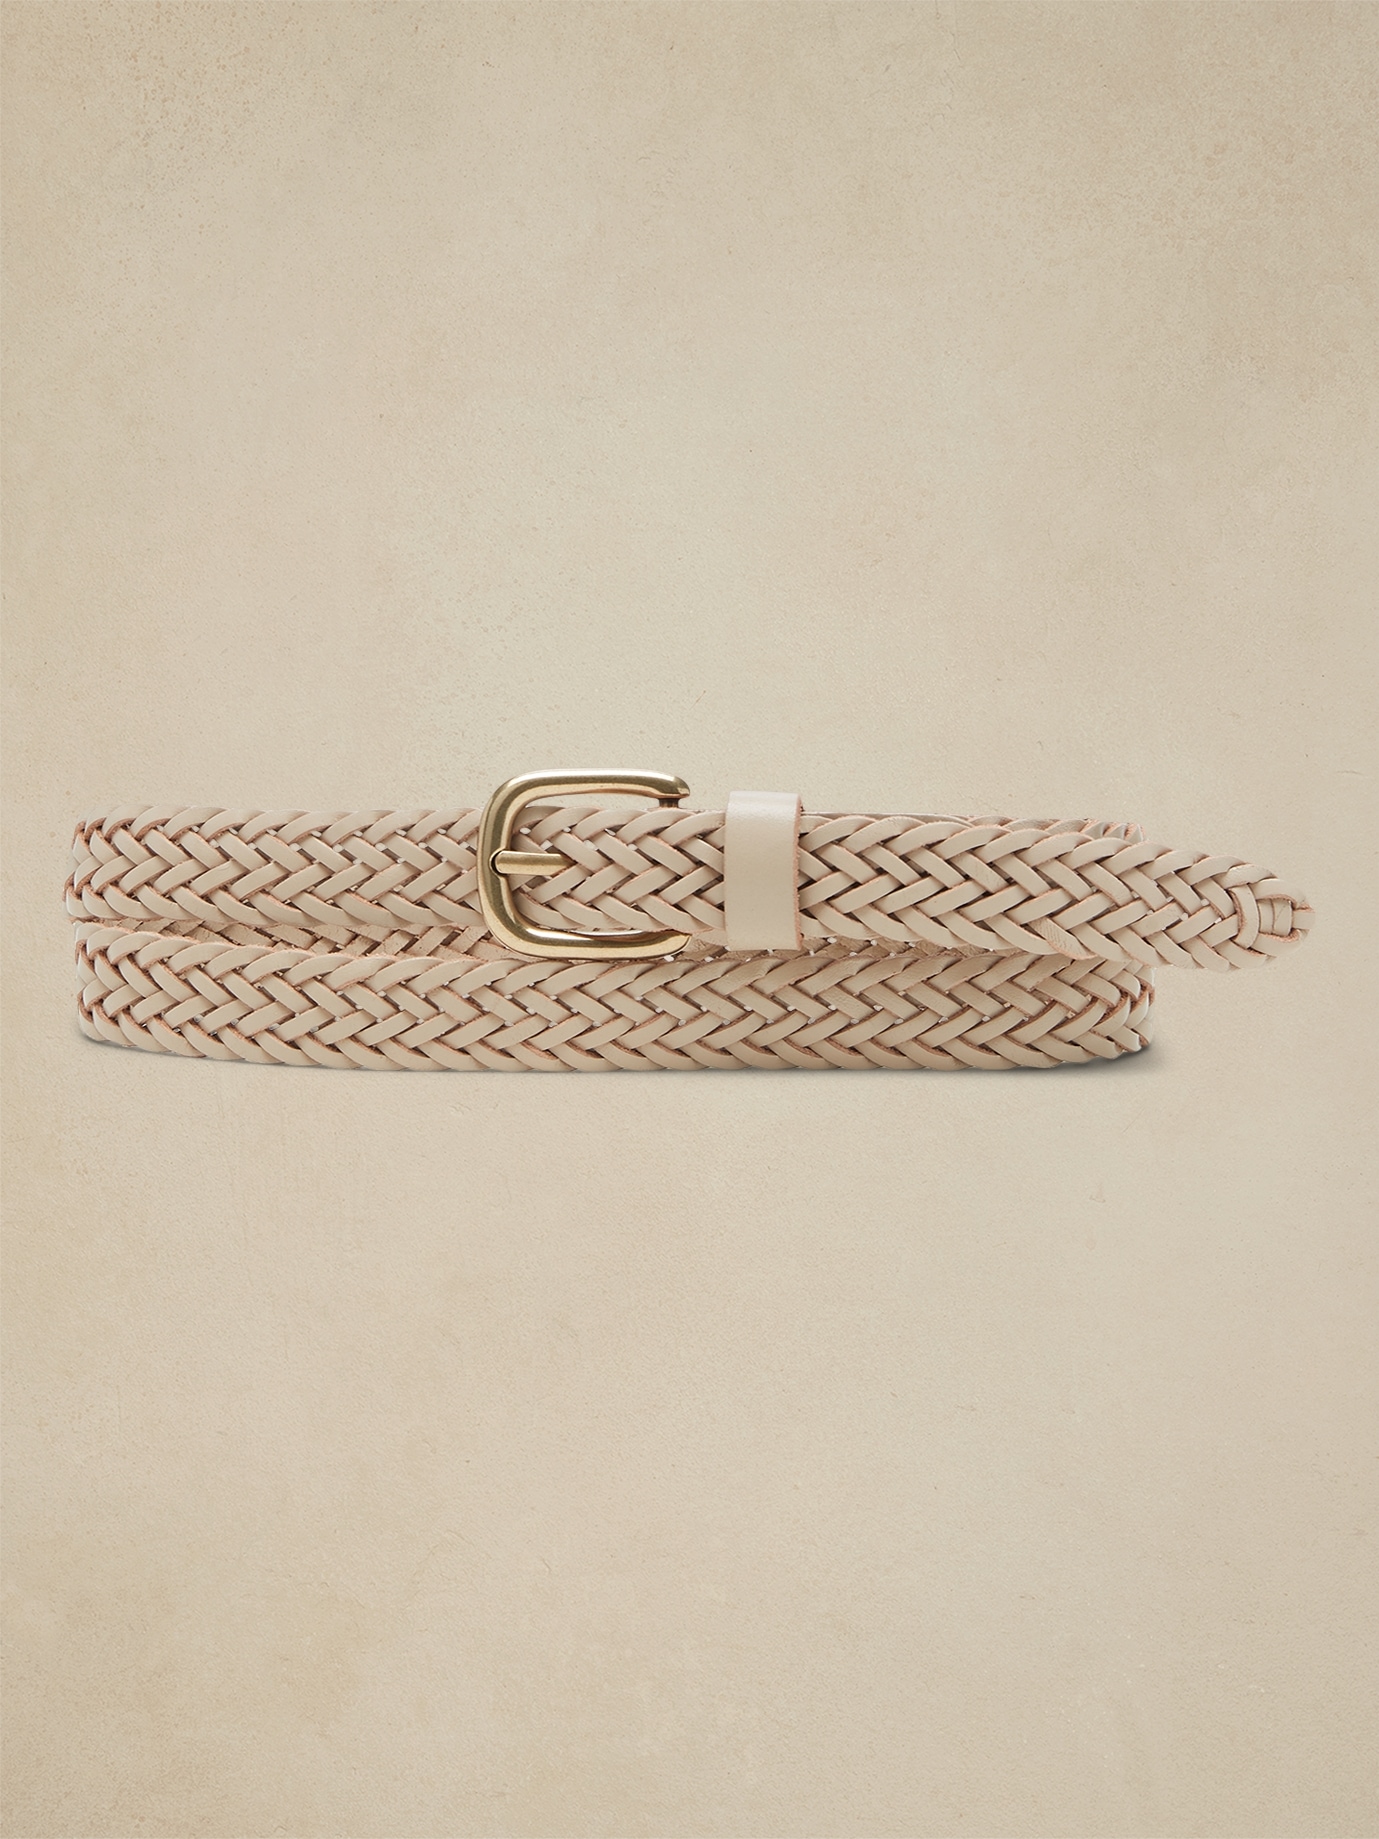 Black Skinny Braided Belt with Bronze, Silver and Brass Micro